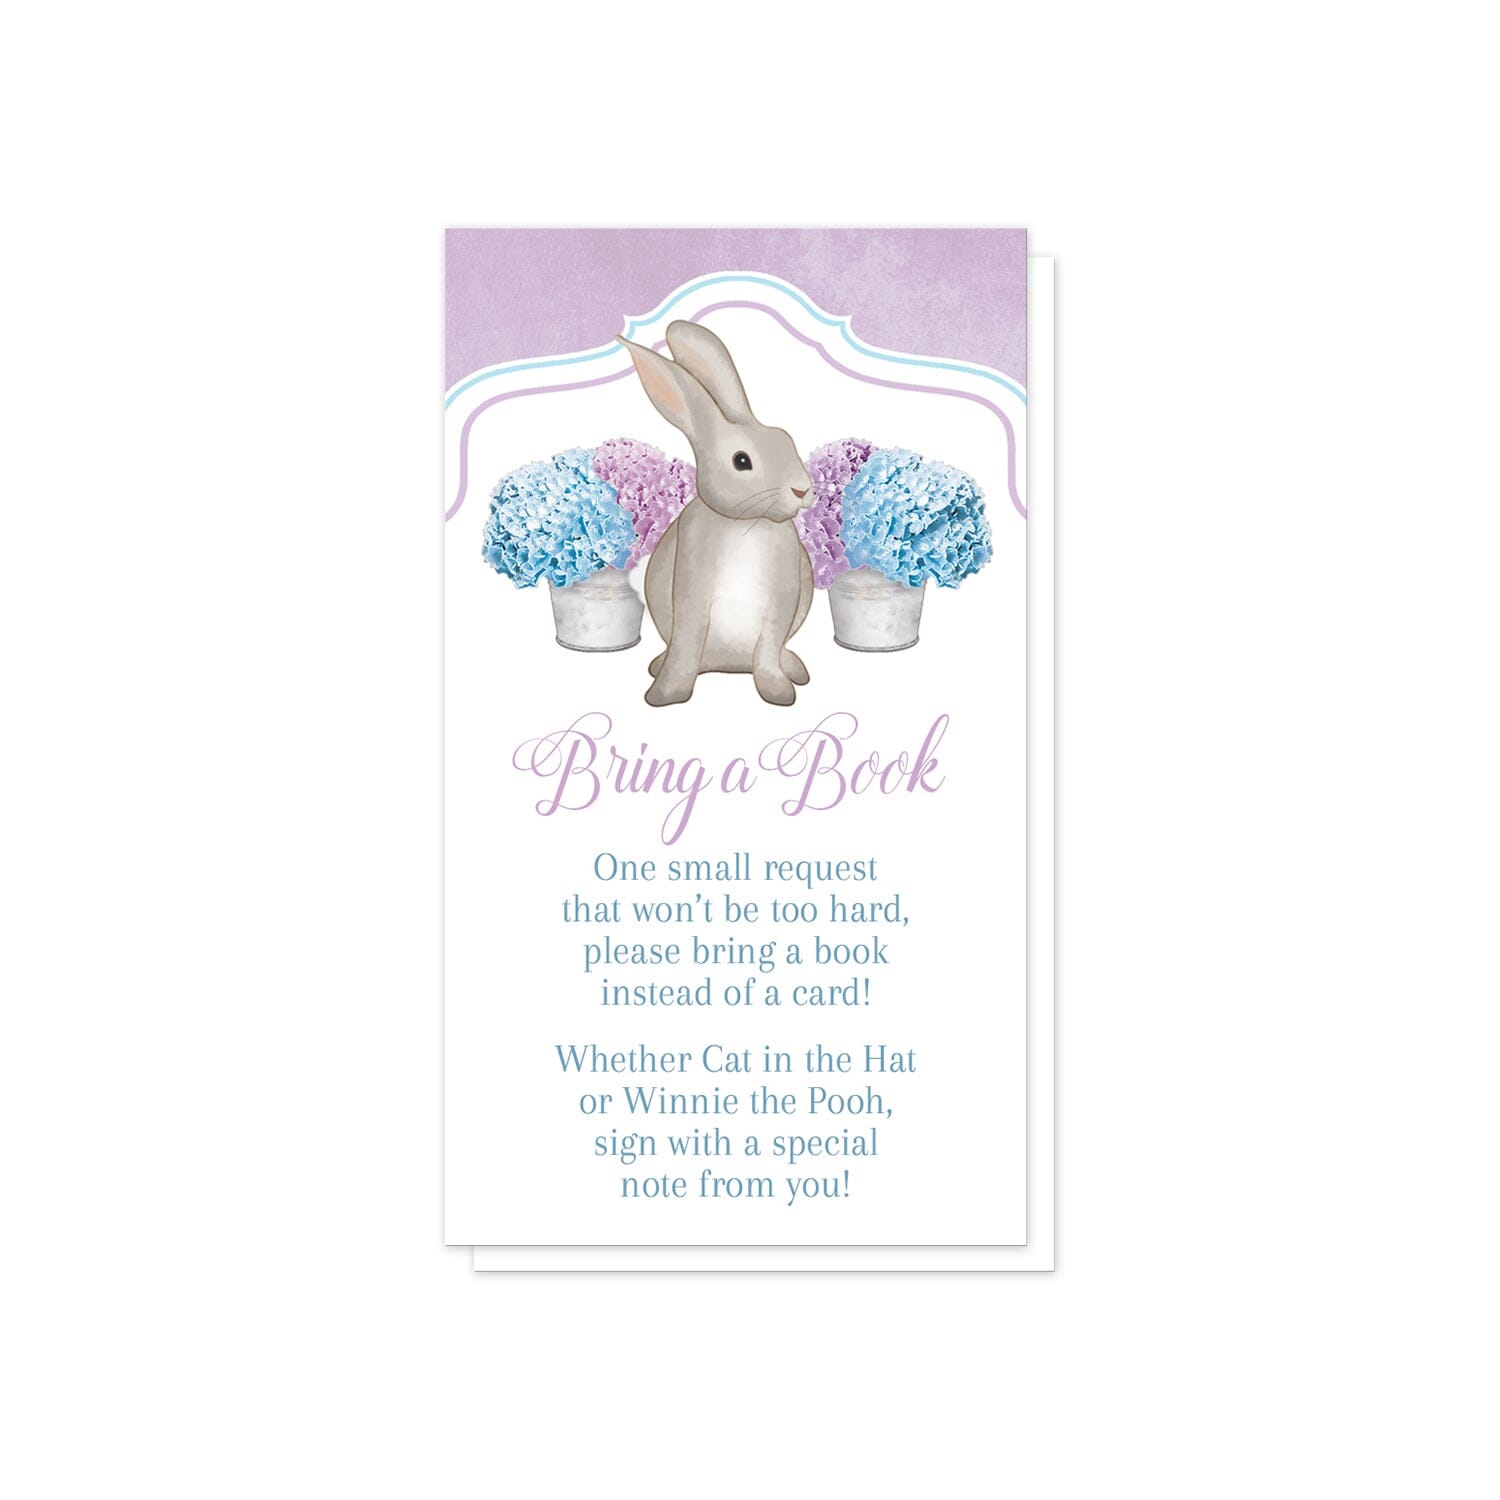 Purple Blue Hydrangea Rabbit Bring a Book Cards at Artistically Invited. Adorable purple blue hydrangea rabbit bring a book cards with a watercolor-inspired illustration of cute little brown bunny rabbit with blue and purple hydrangea floral arrangements in tin buckets behind it and a rustic purple background at the top. Your book request details are printed in purple and blue on white below the cute rabbit. 